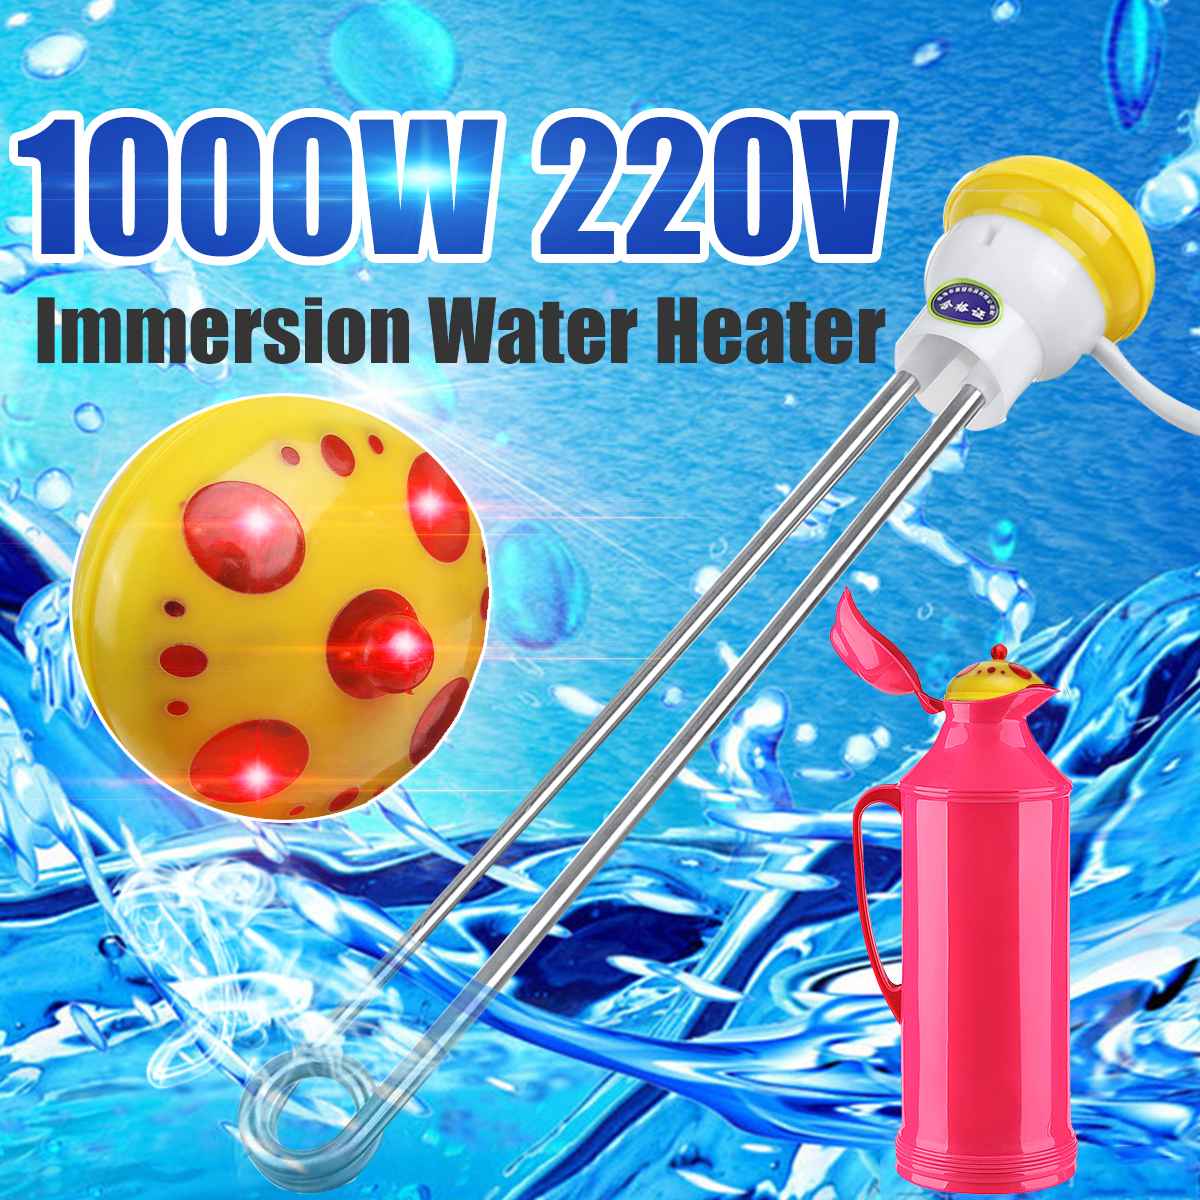 220V 1000W Electric Heater Boiler Water Heating Element Portable Immersion Suspension Bathroom Swimming Pool automatically off